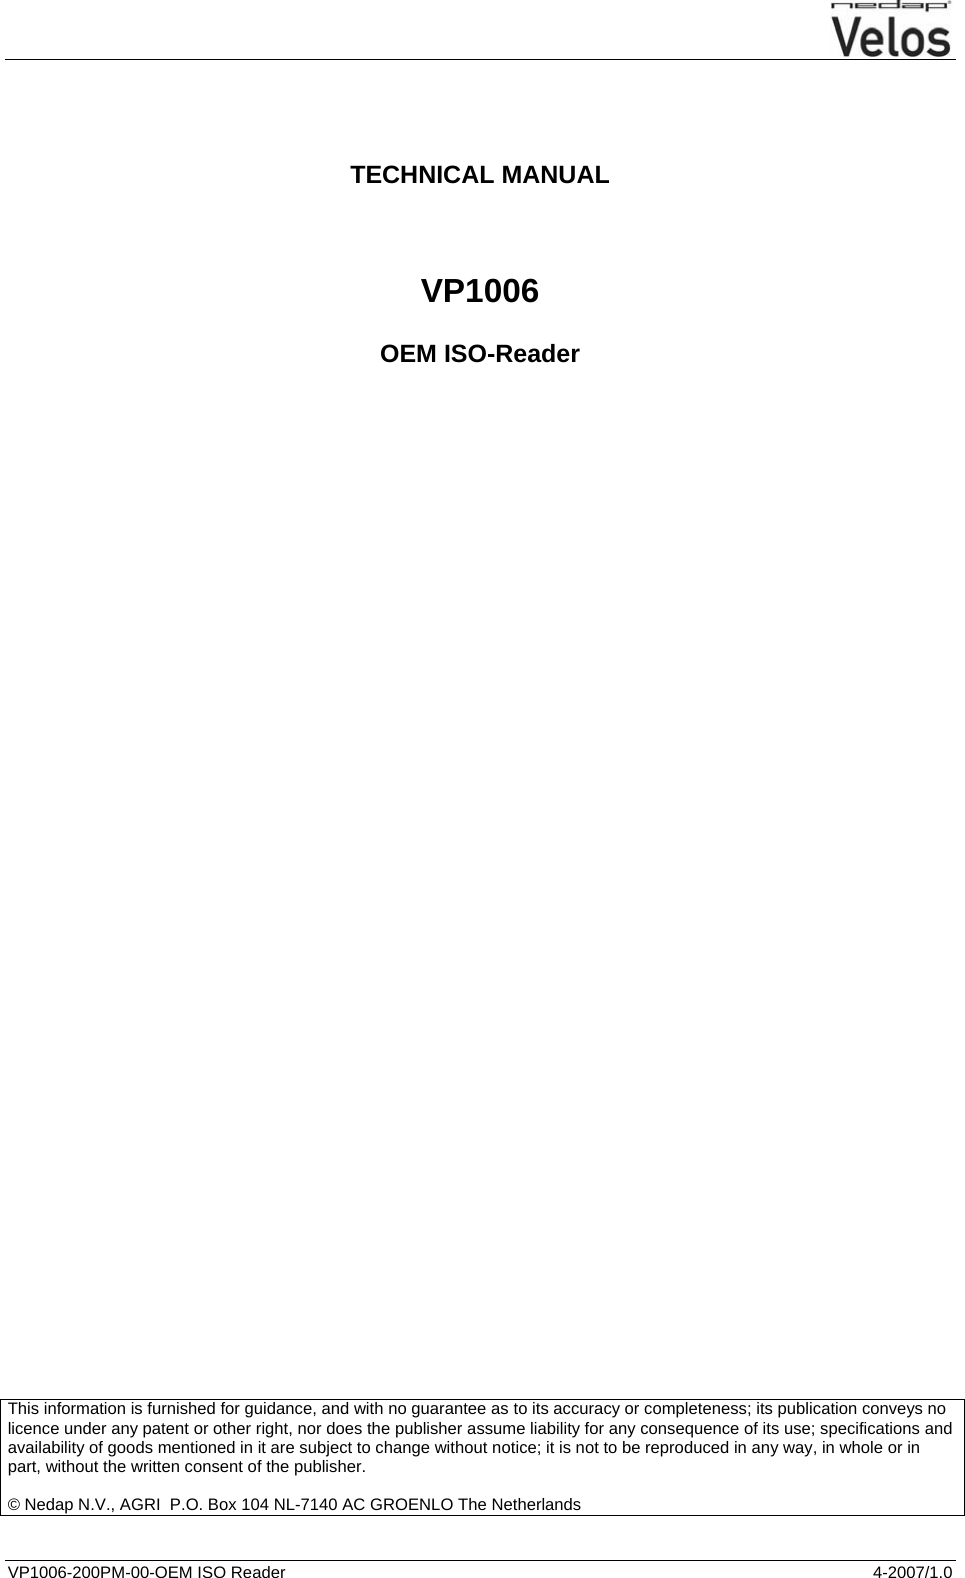  VP1006-200PM-00-OEM ISO Reader  4-2007/1.0      TECHNICAL MANUAL   VP1006  OEM ISO-Reader                                             This information is furnished for guidance, and with no guarantee as to its accuracy or completeness; its publication conveys no licence under any patent or other right, nor does the publisher assume liability for any consequence of its use; specifications and availability of goods mentioned in it are subject to change without notice; it is not to be reproduced in any way, in whole or in part, without the written consent of the publisher.  © Nedap N.V., AGRI  P.O. Box 104 NL-7140 AC GROENLO The Netherlands     